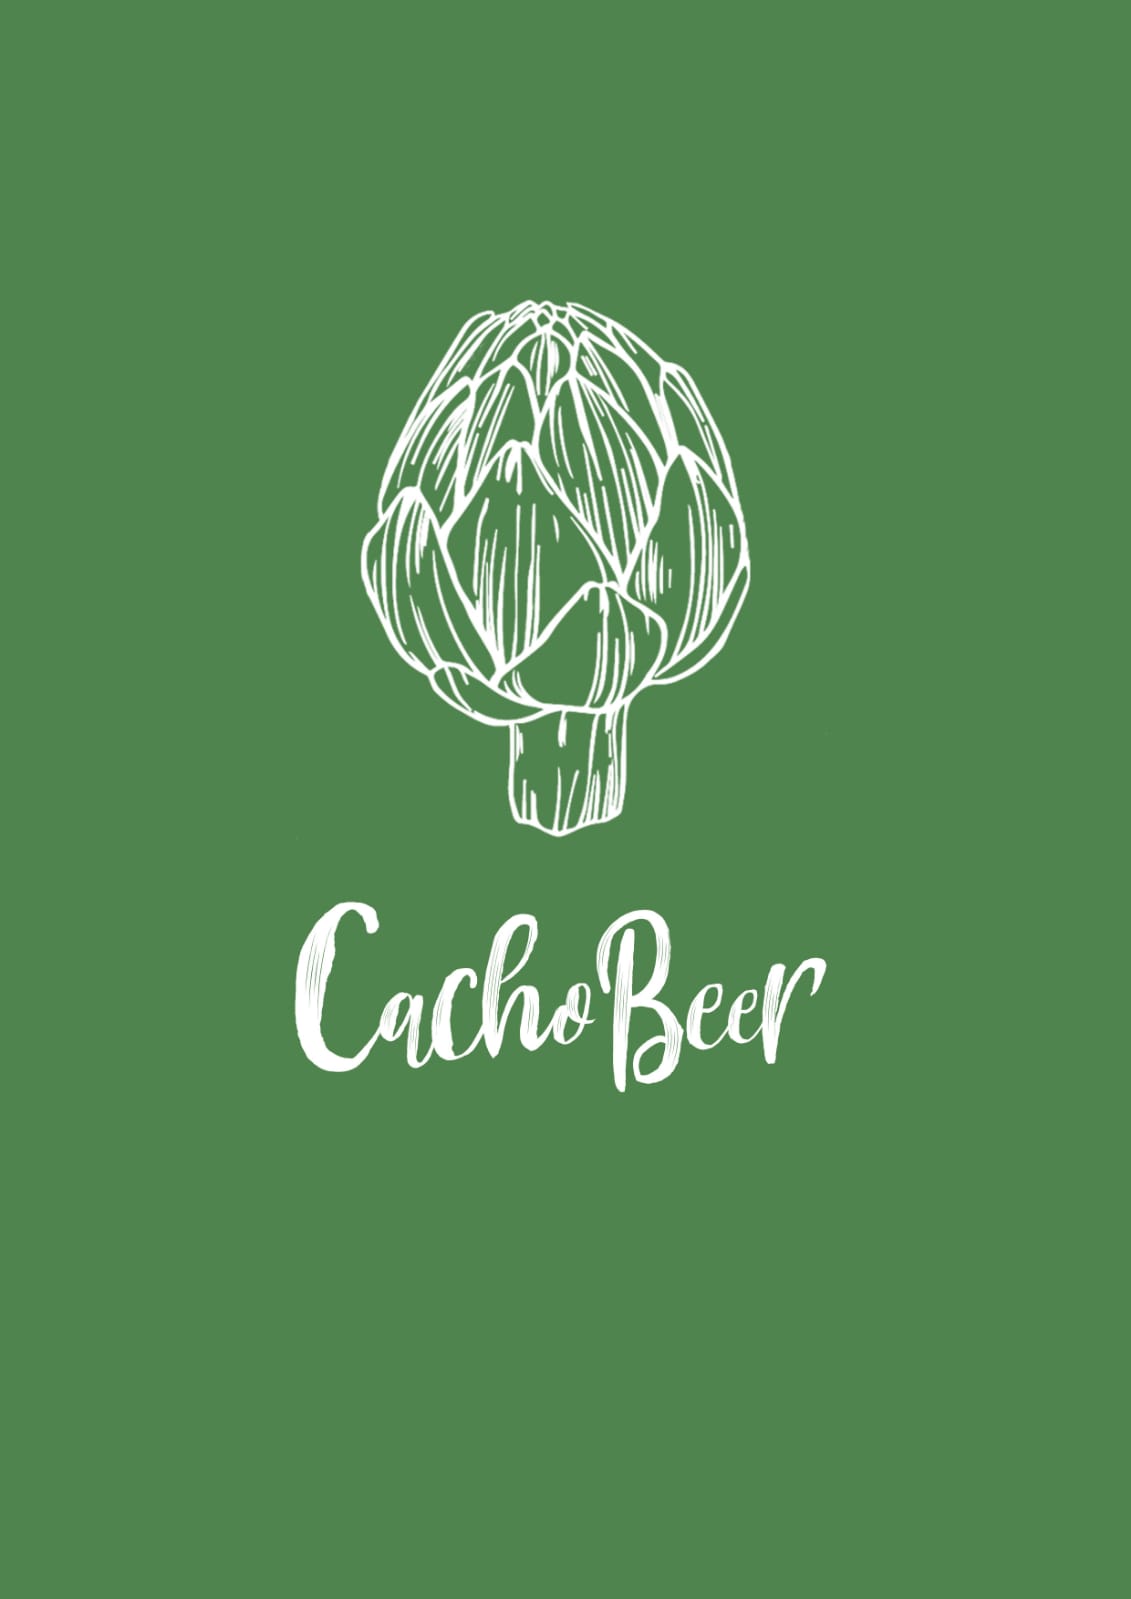 Cacho Beer